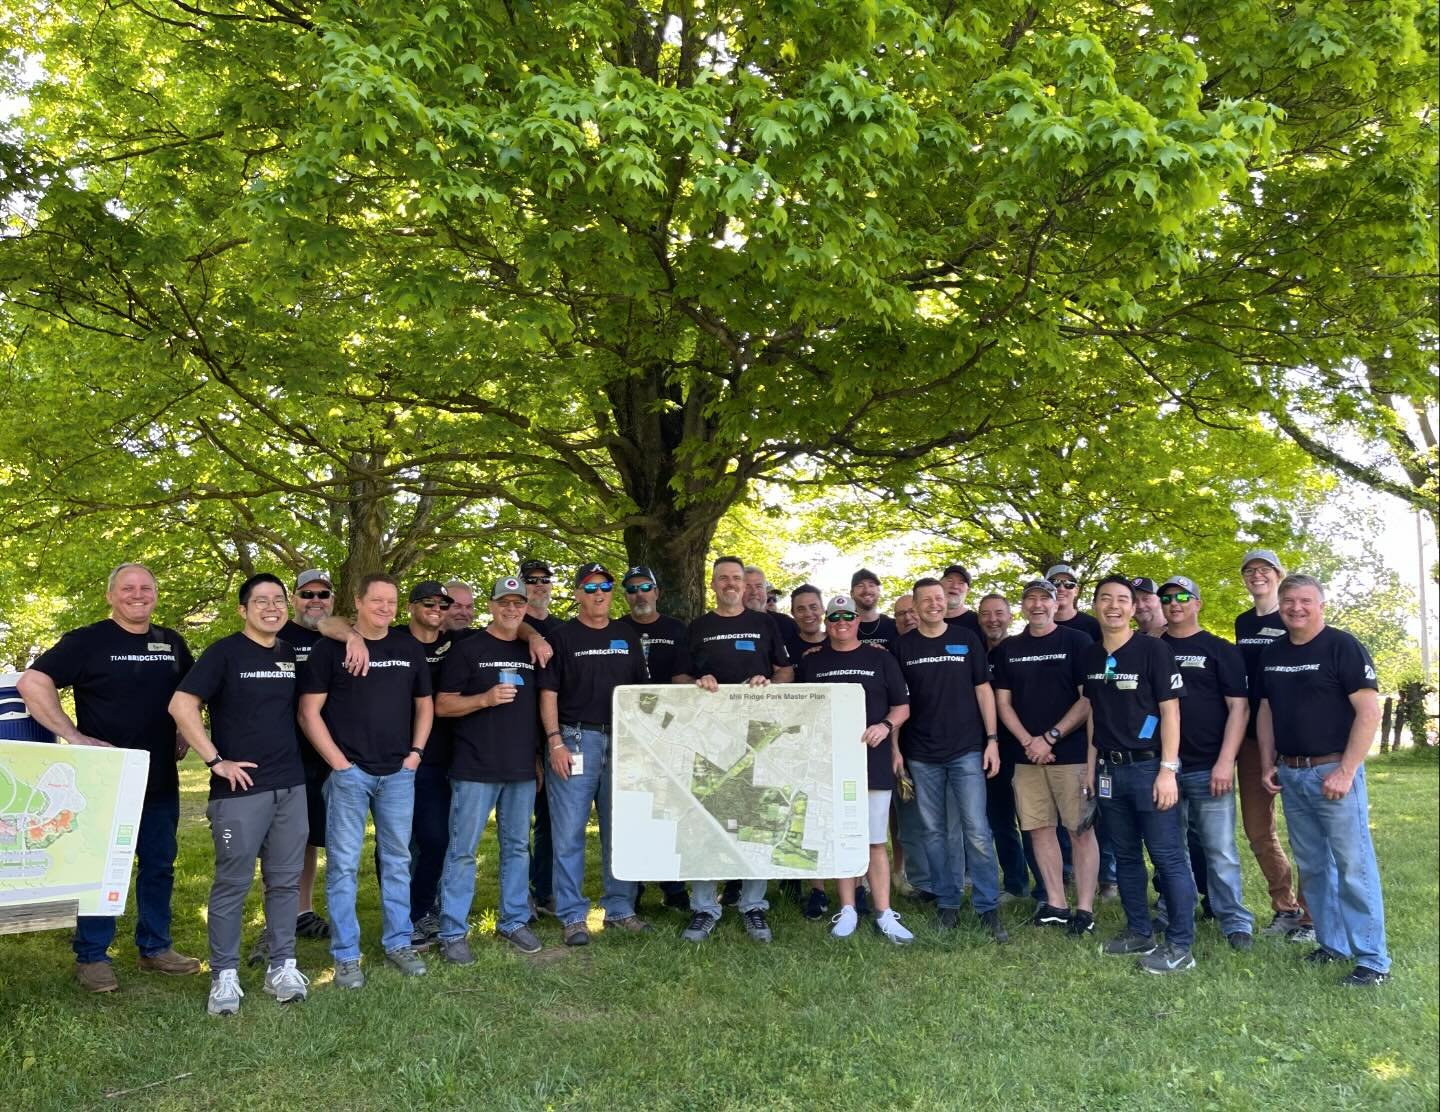 Last week was a productive and fun #nationalvolunteerweek thanks to volunteers from our corporate partners @bridgestonetires @hcahealthcare and @tangeroutlets! Our park is beautified and activities organized for spring experiences. Join us to volunte